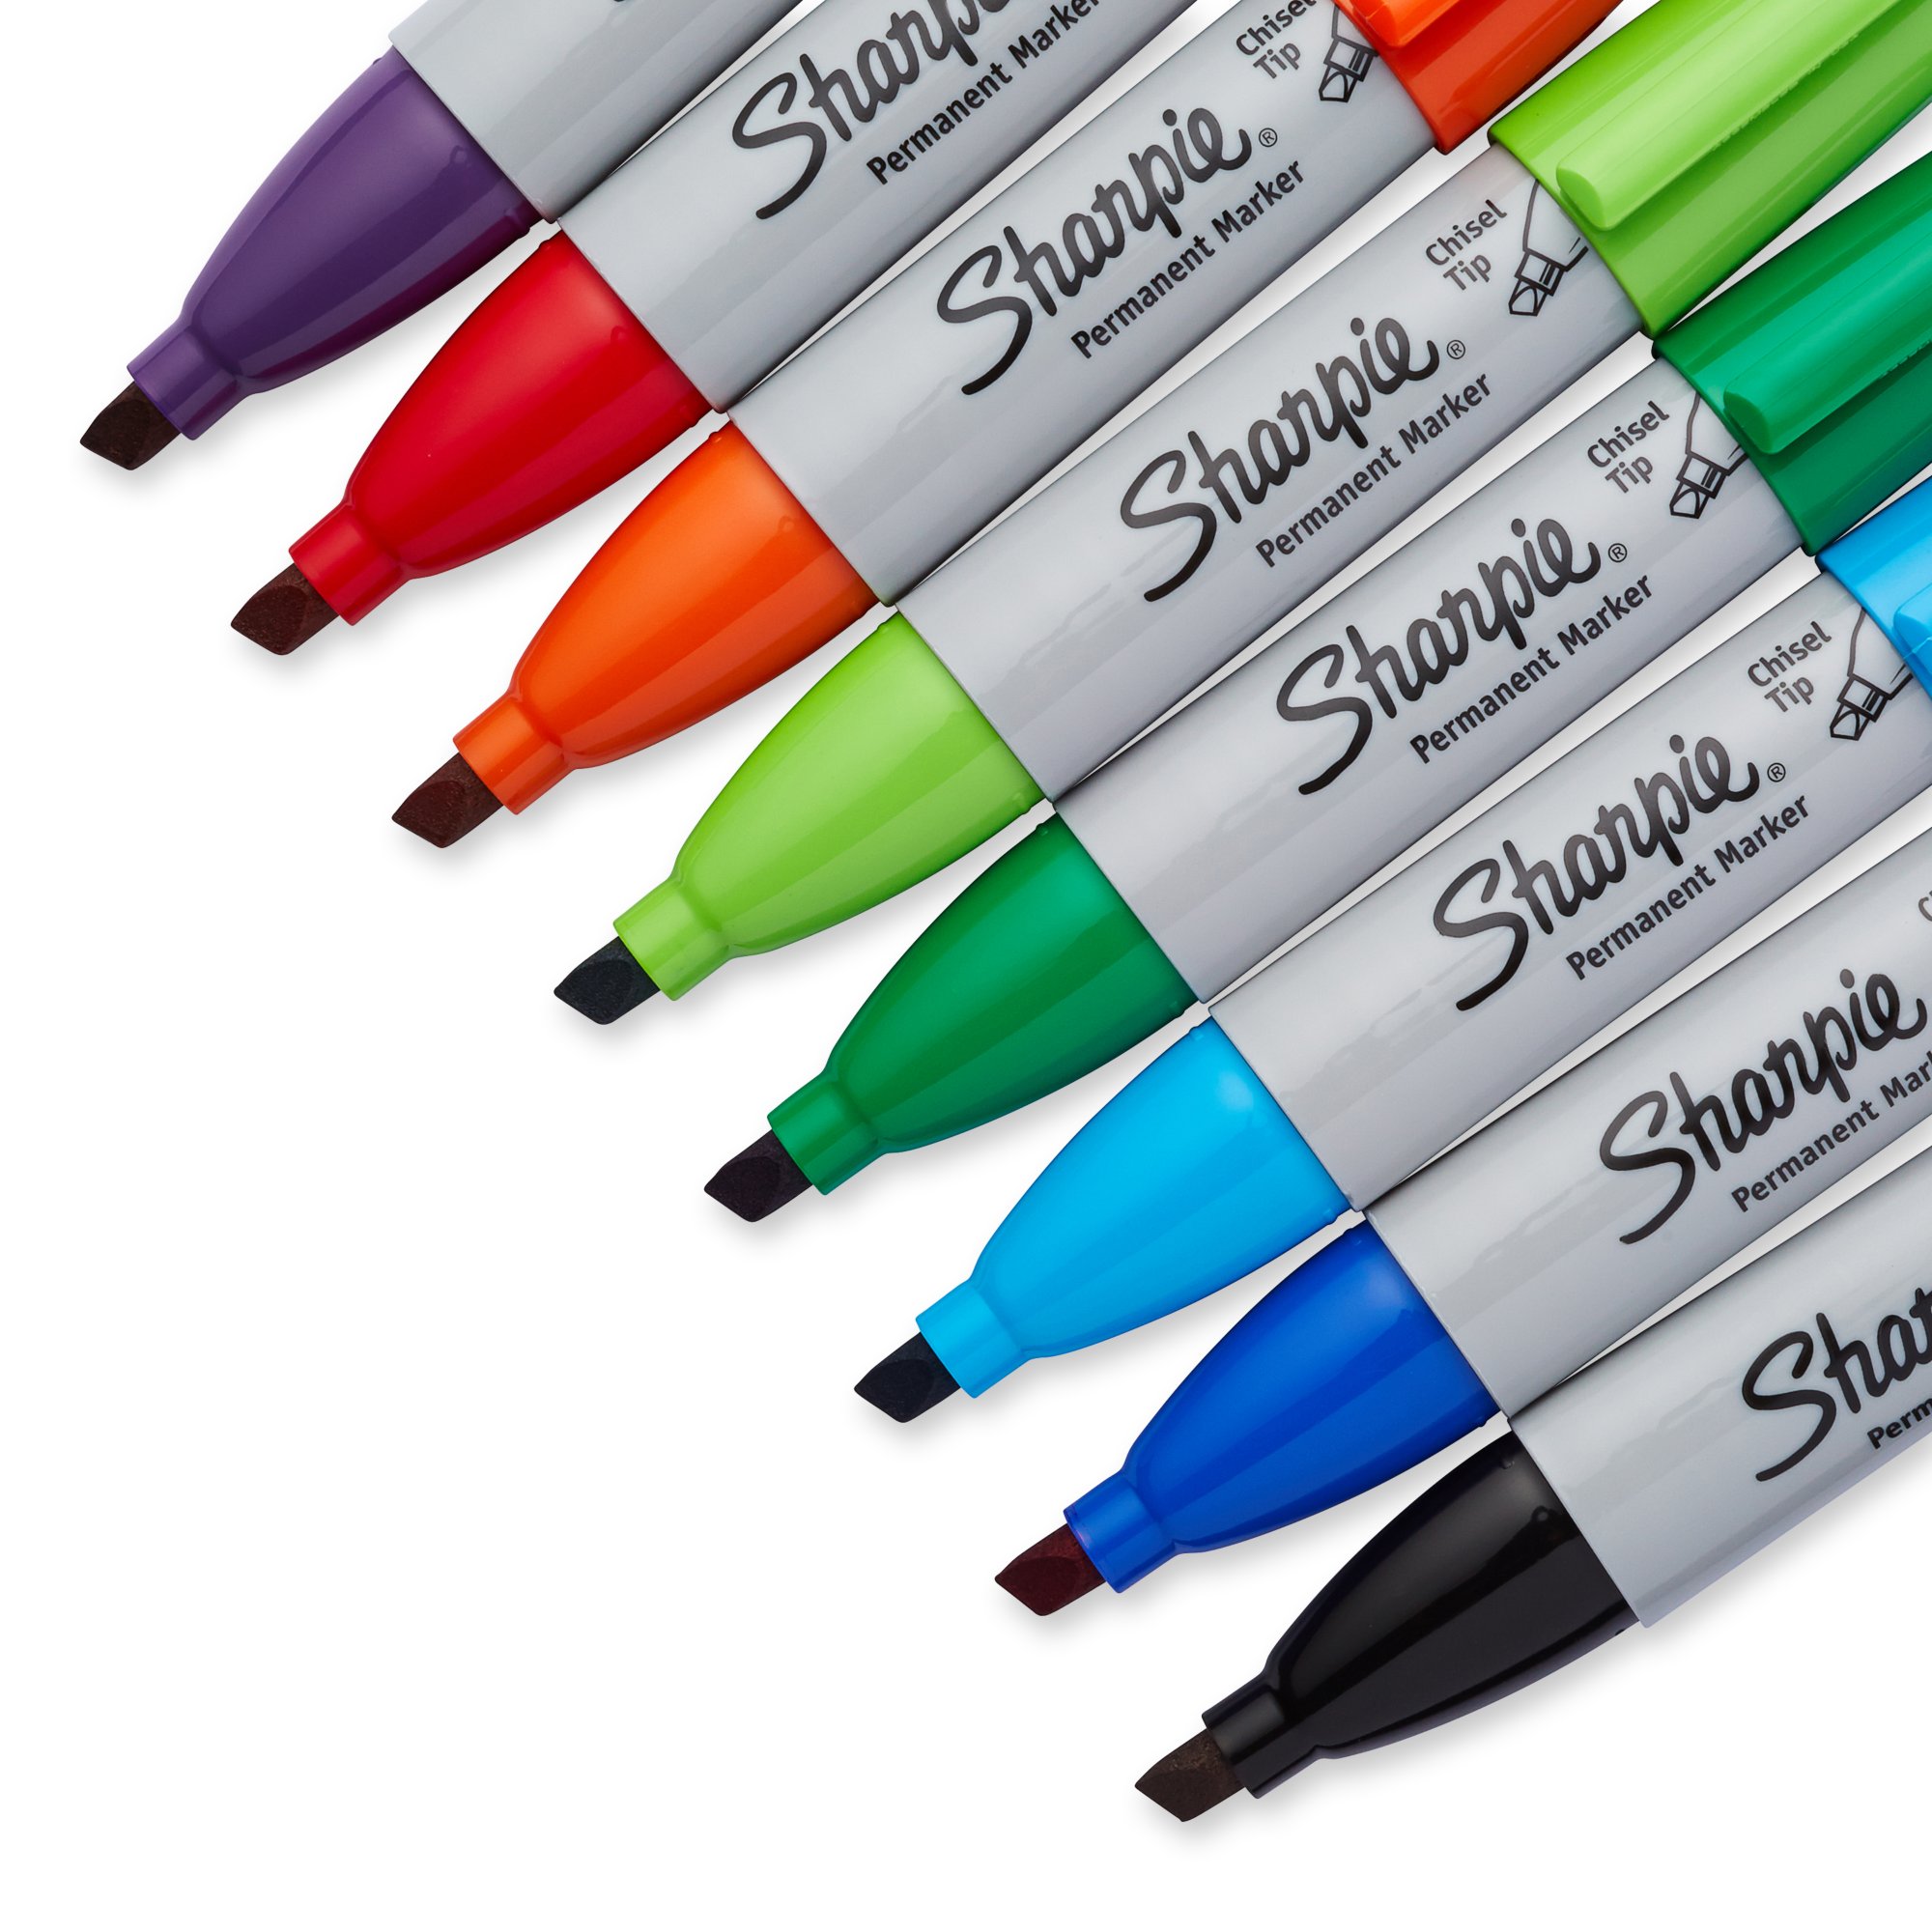 Sharpie Permanent Markers, Chisel Tip, Black, pack of 1 (12 count).